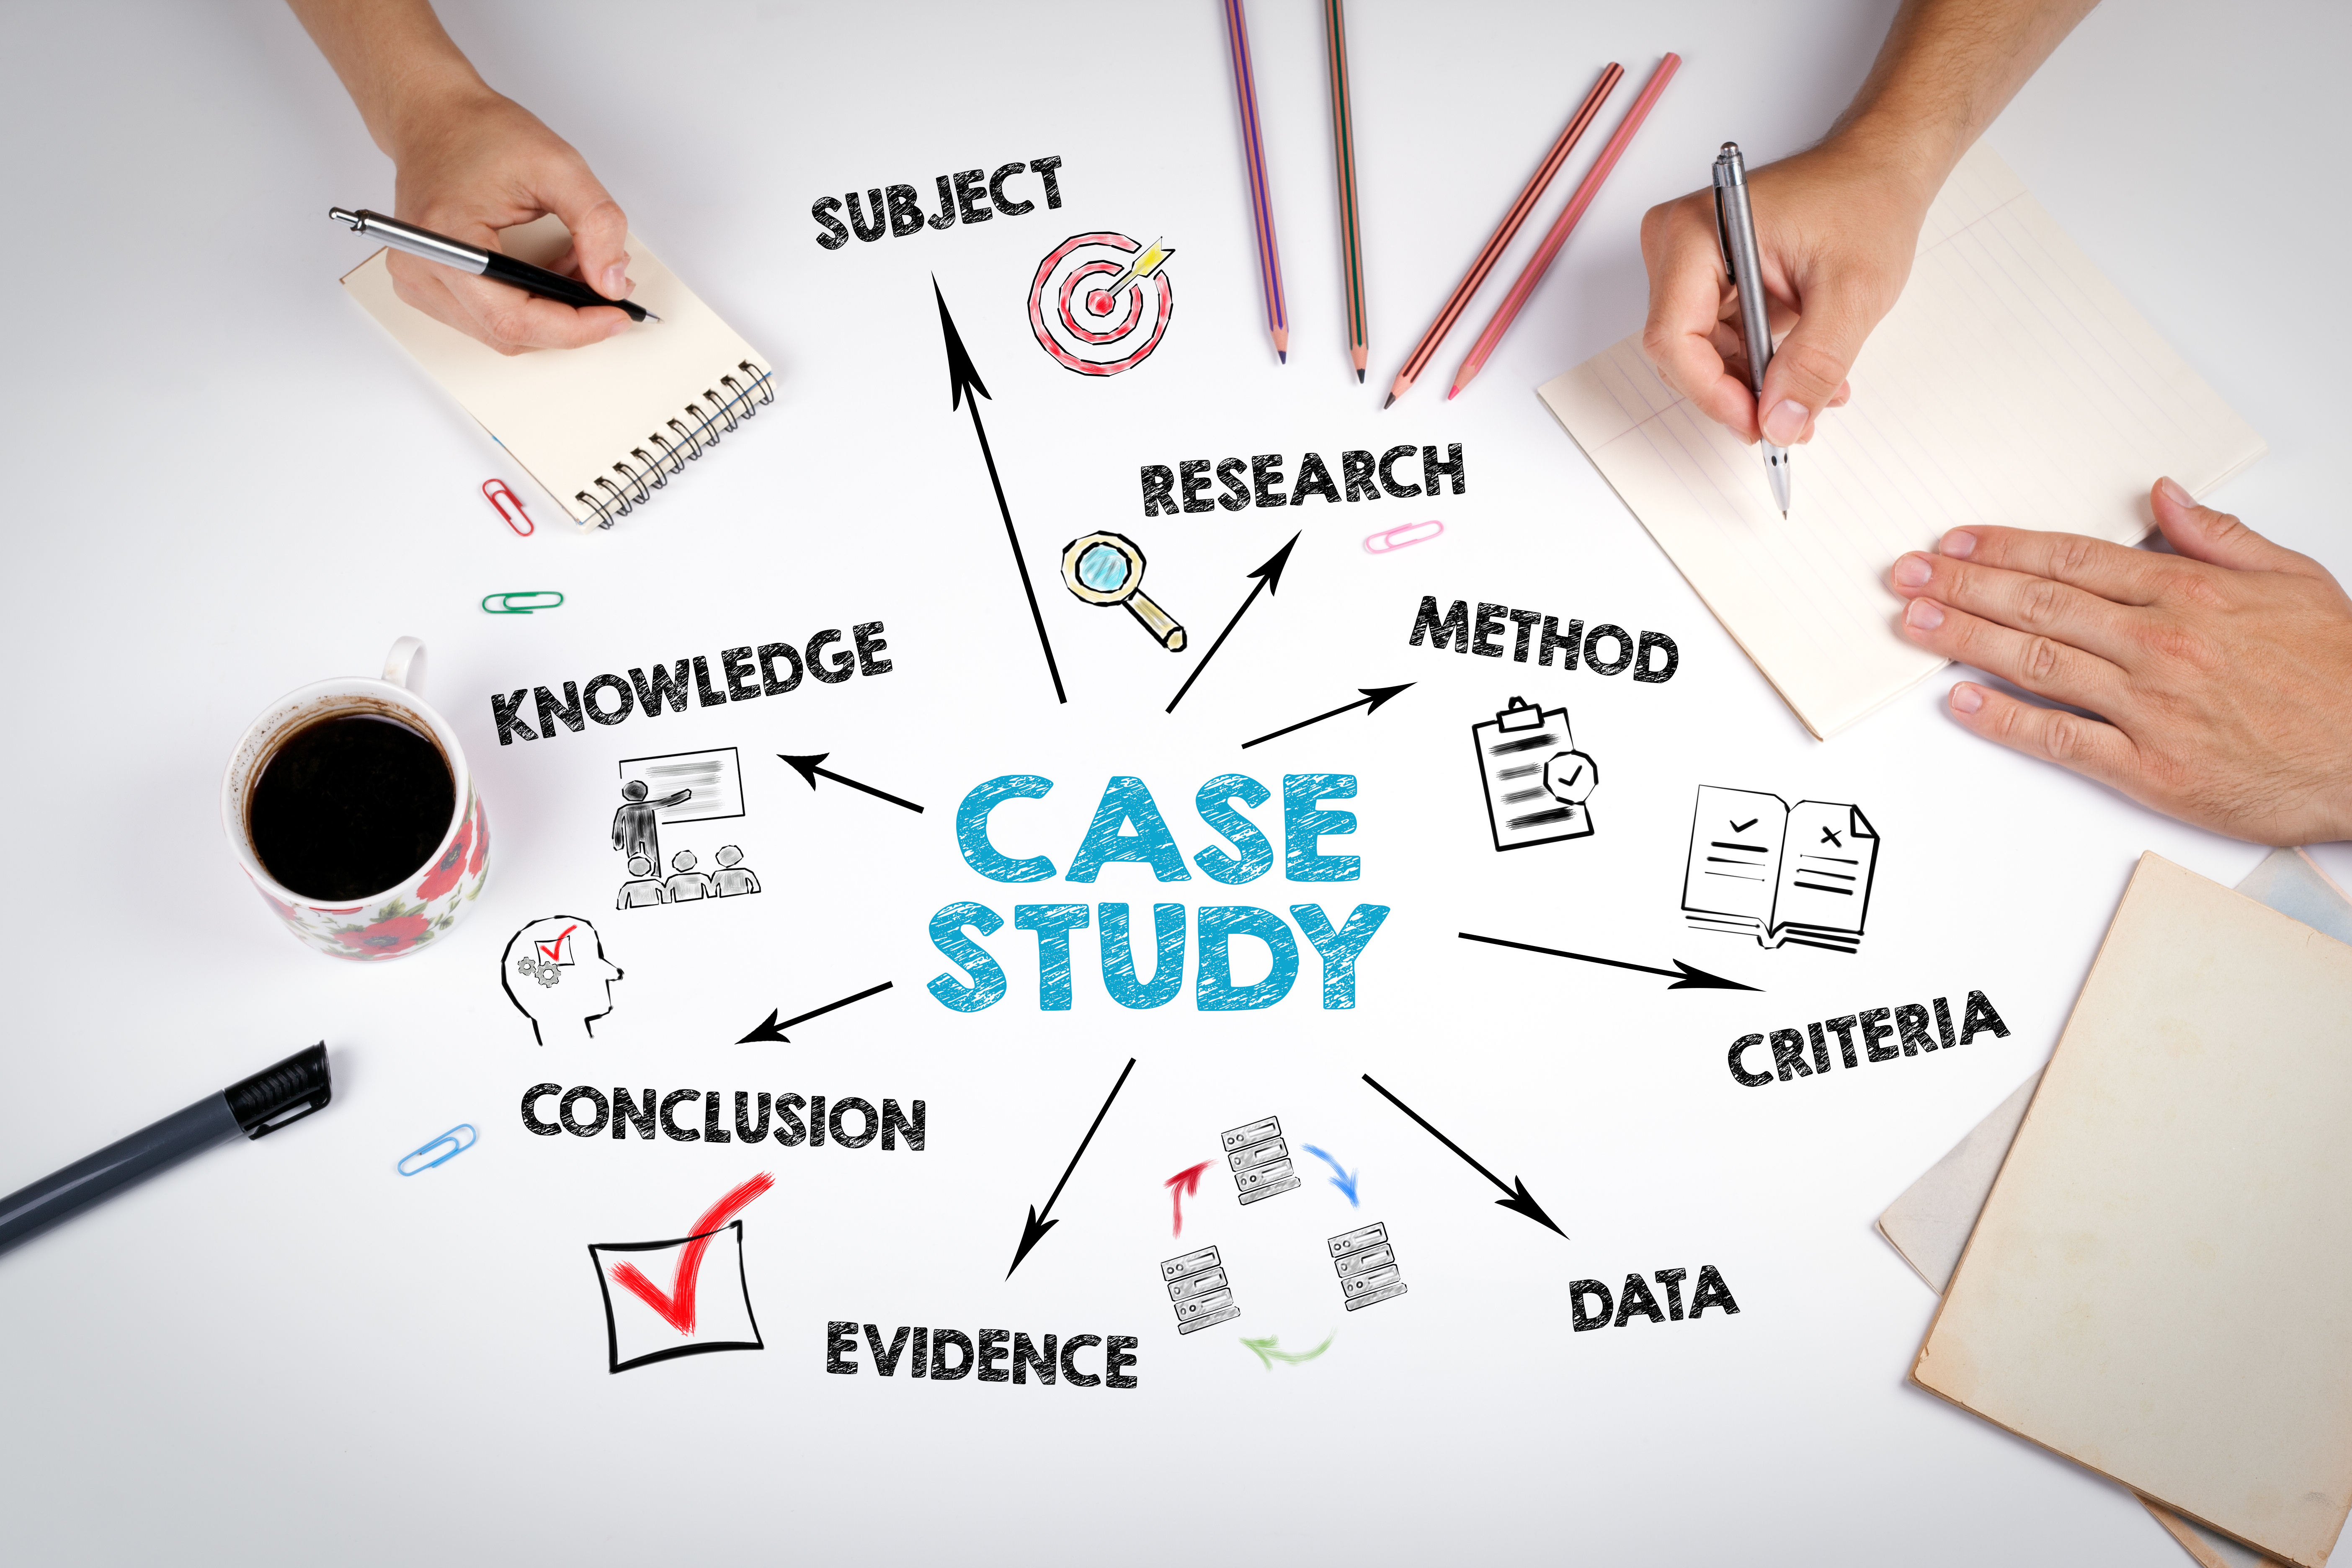 A white background with the word Case Study written in blue capital letters. There are several arrows coming off of the word Case Study, pointing to other words including subject, knowledge, research, method, criteria, data, evidence, and conclusion. 